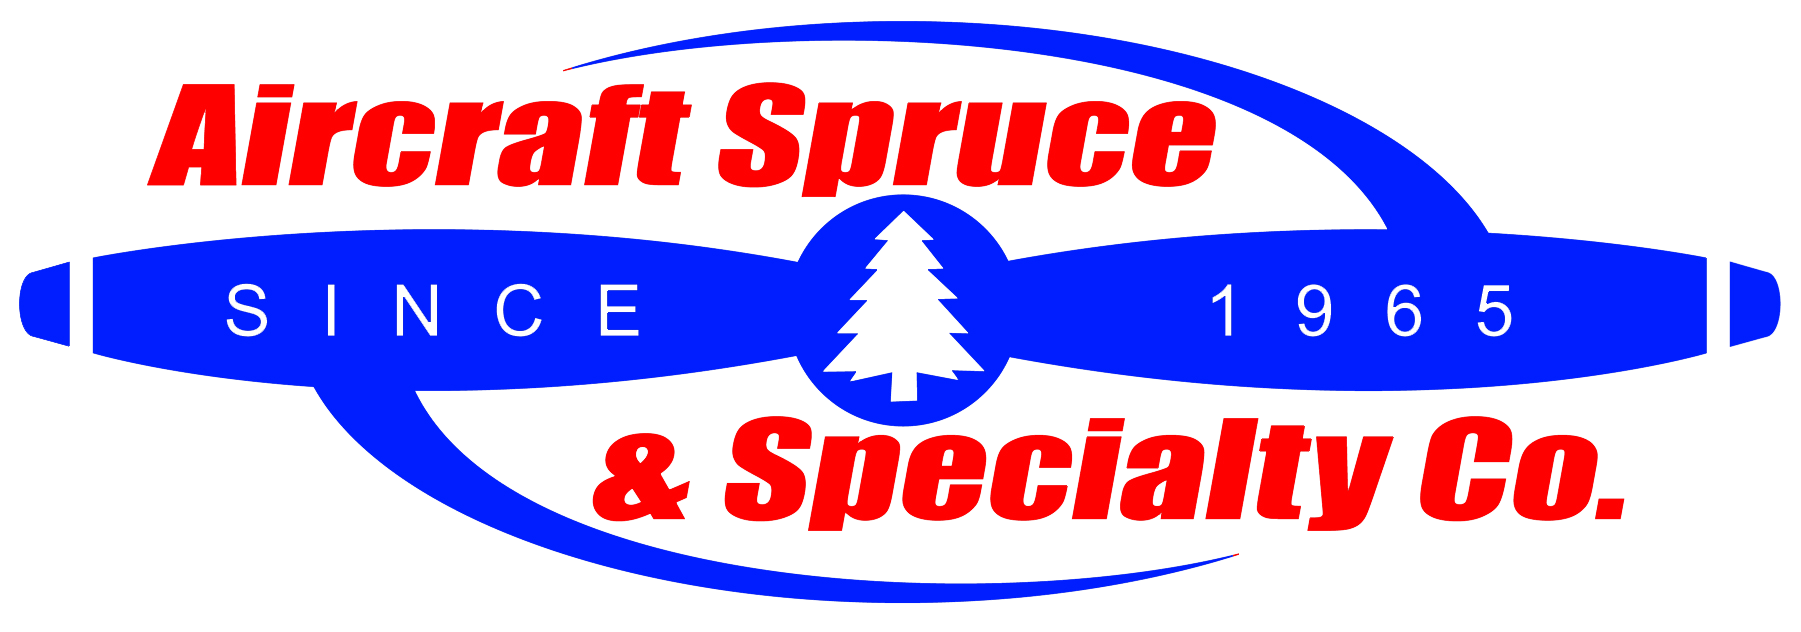 Aircraft Spruce & Specialty Co. 